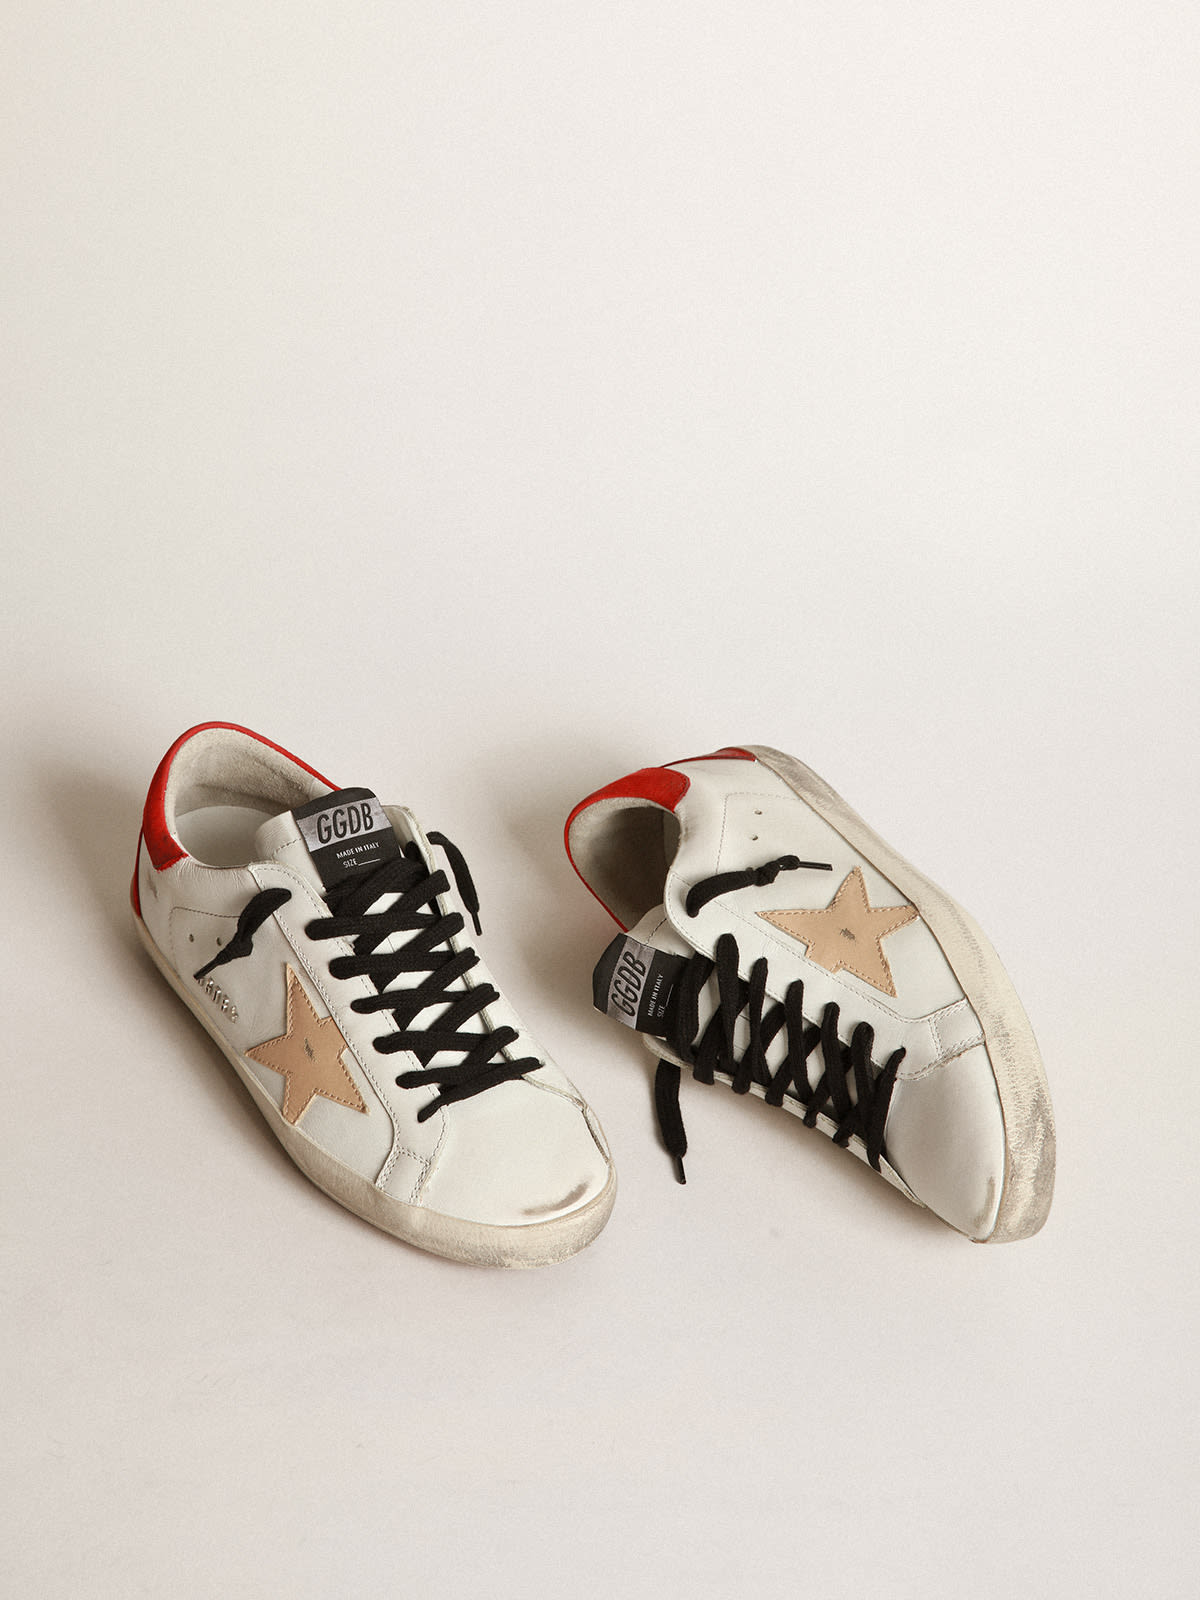 Golden Goose - White Super-Star sneakers with red rear and black laces in 